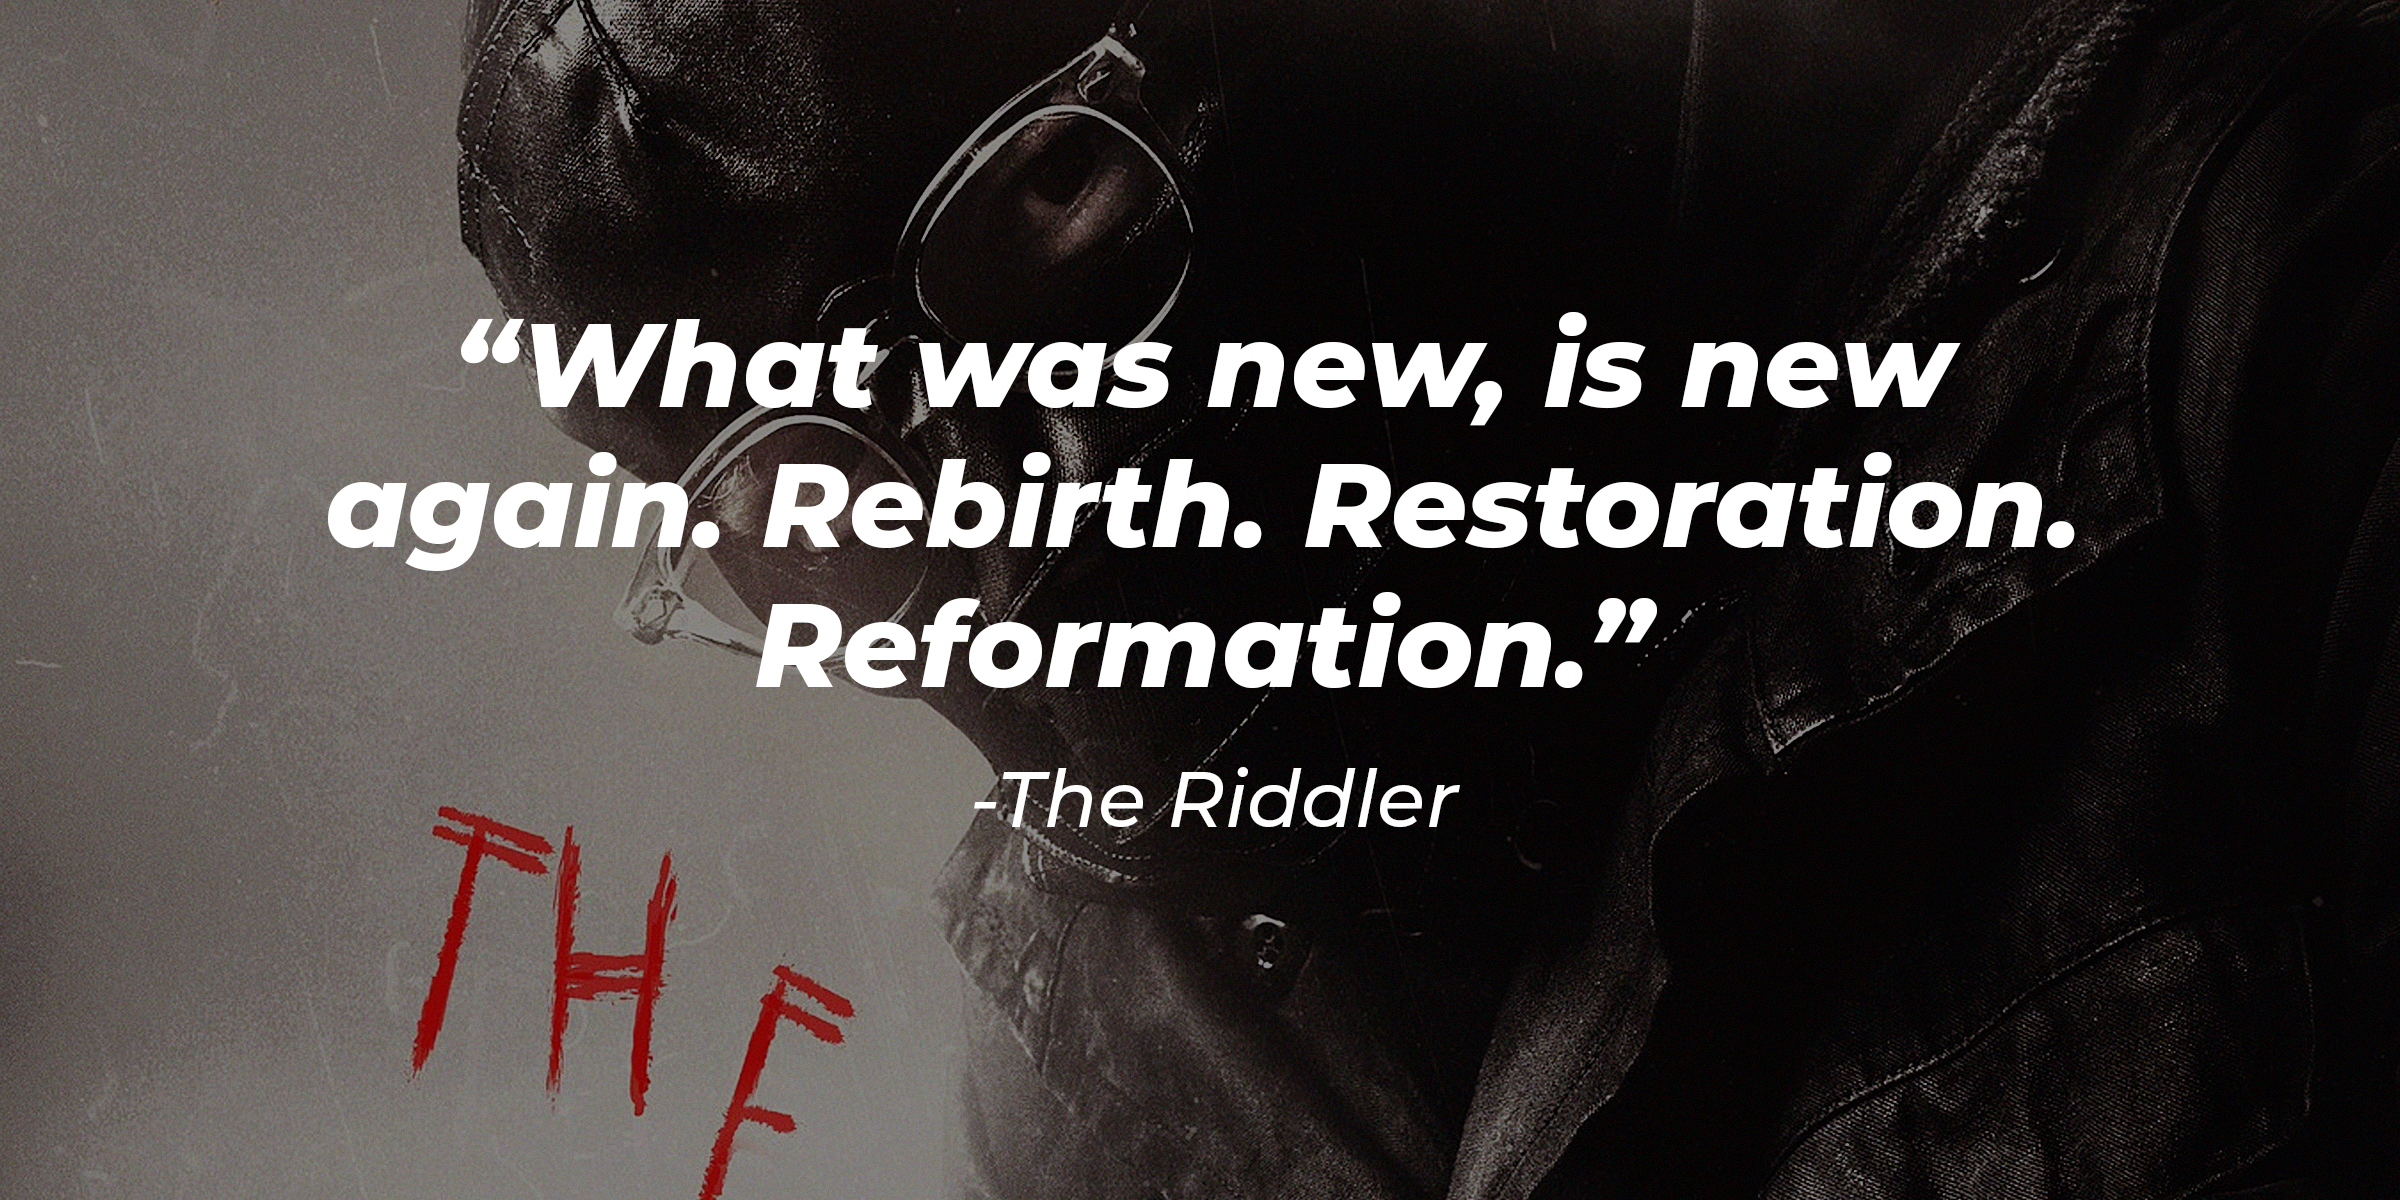 A photo of The Riddler with The Riddler's quote: “What was new, is new again. Rebirth. Restoration. Reformation.” | facebook.com/TheBatman